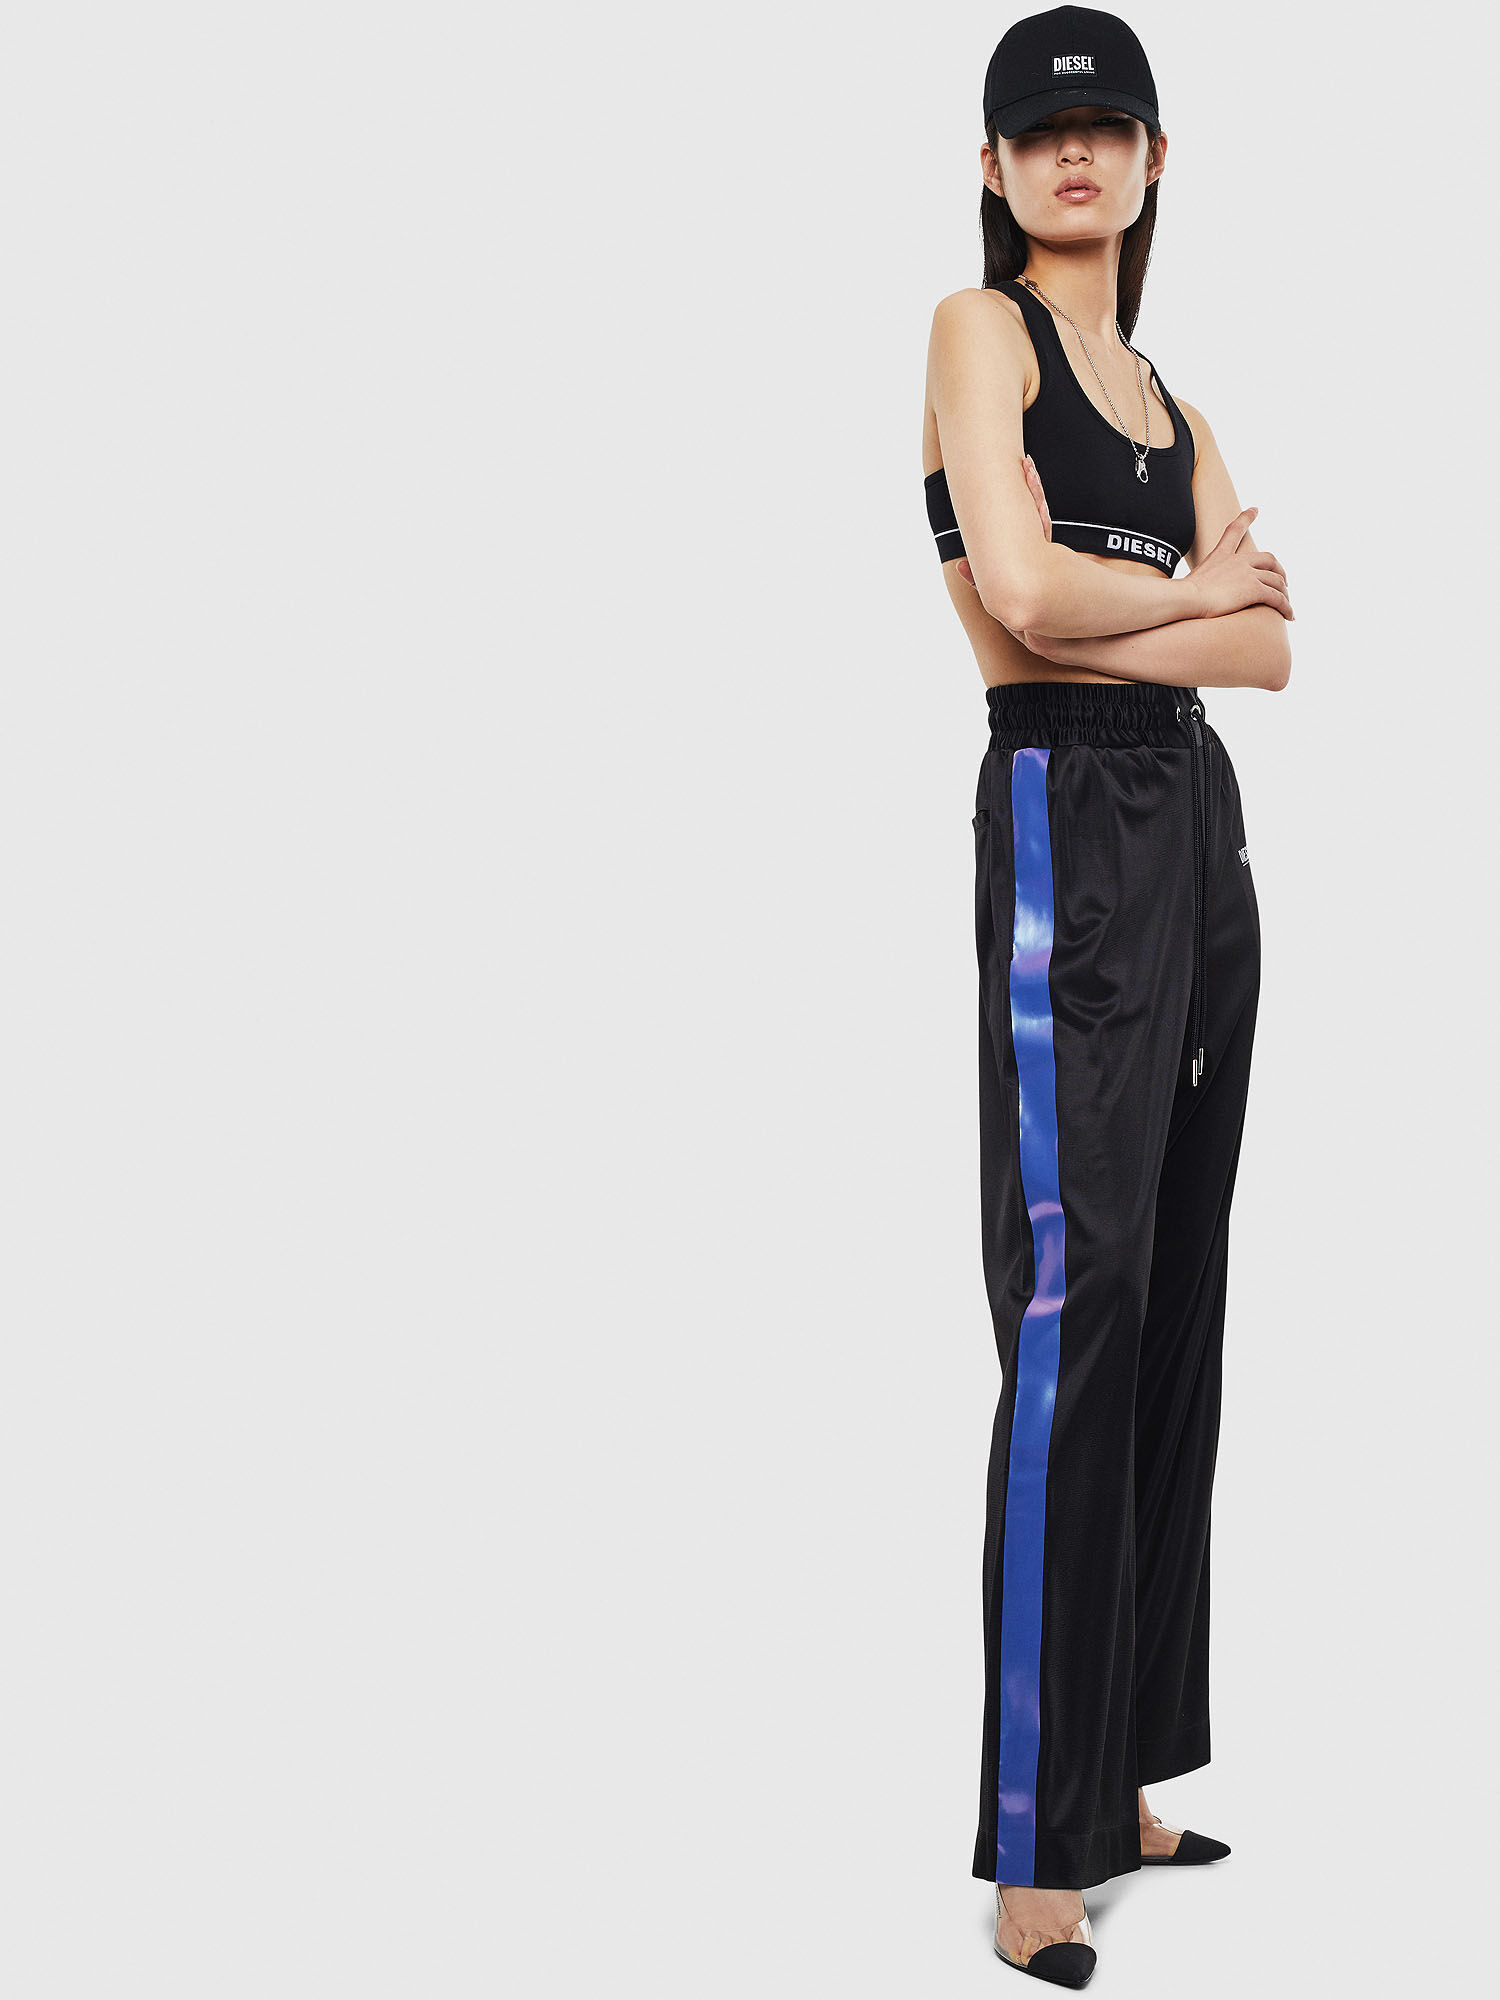 These track pants have buttons on the side that can be opened. They are  called popper pants.